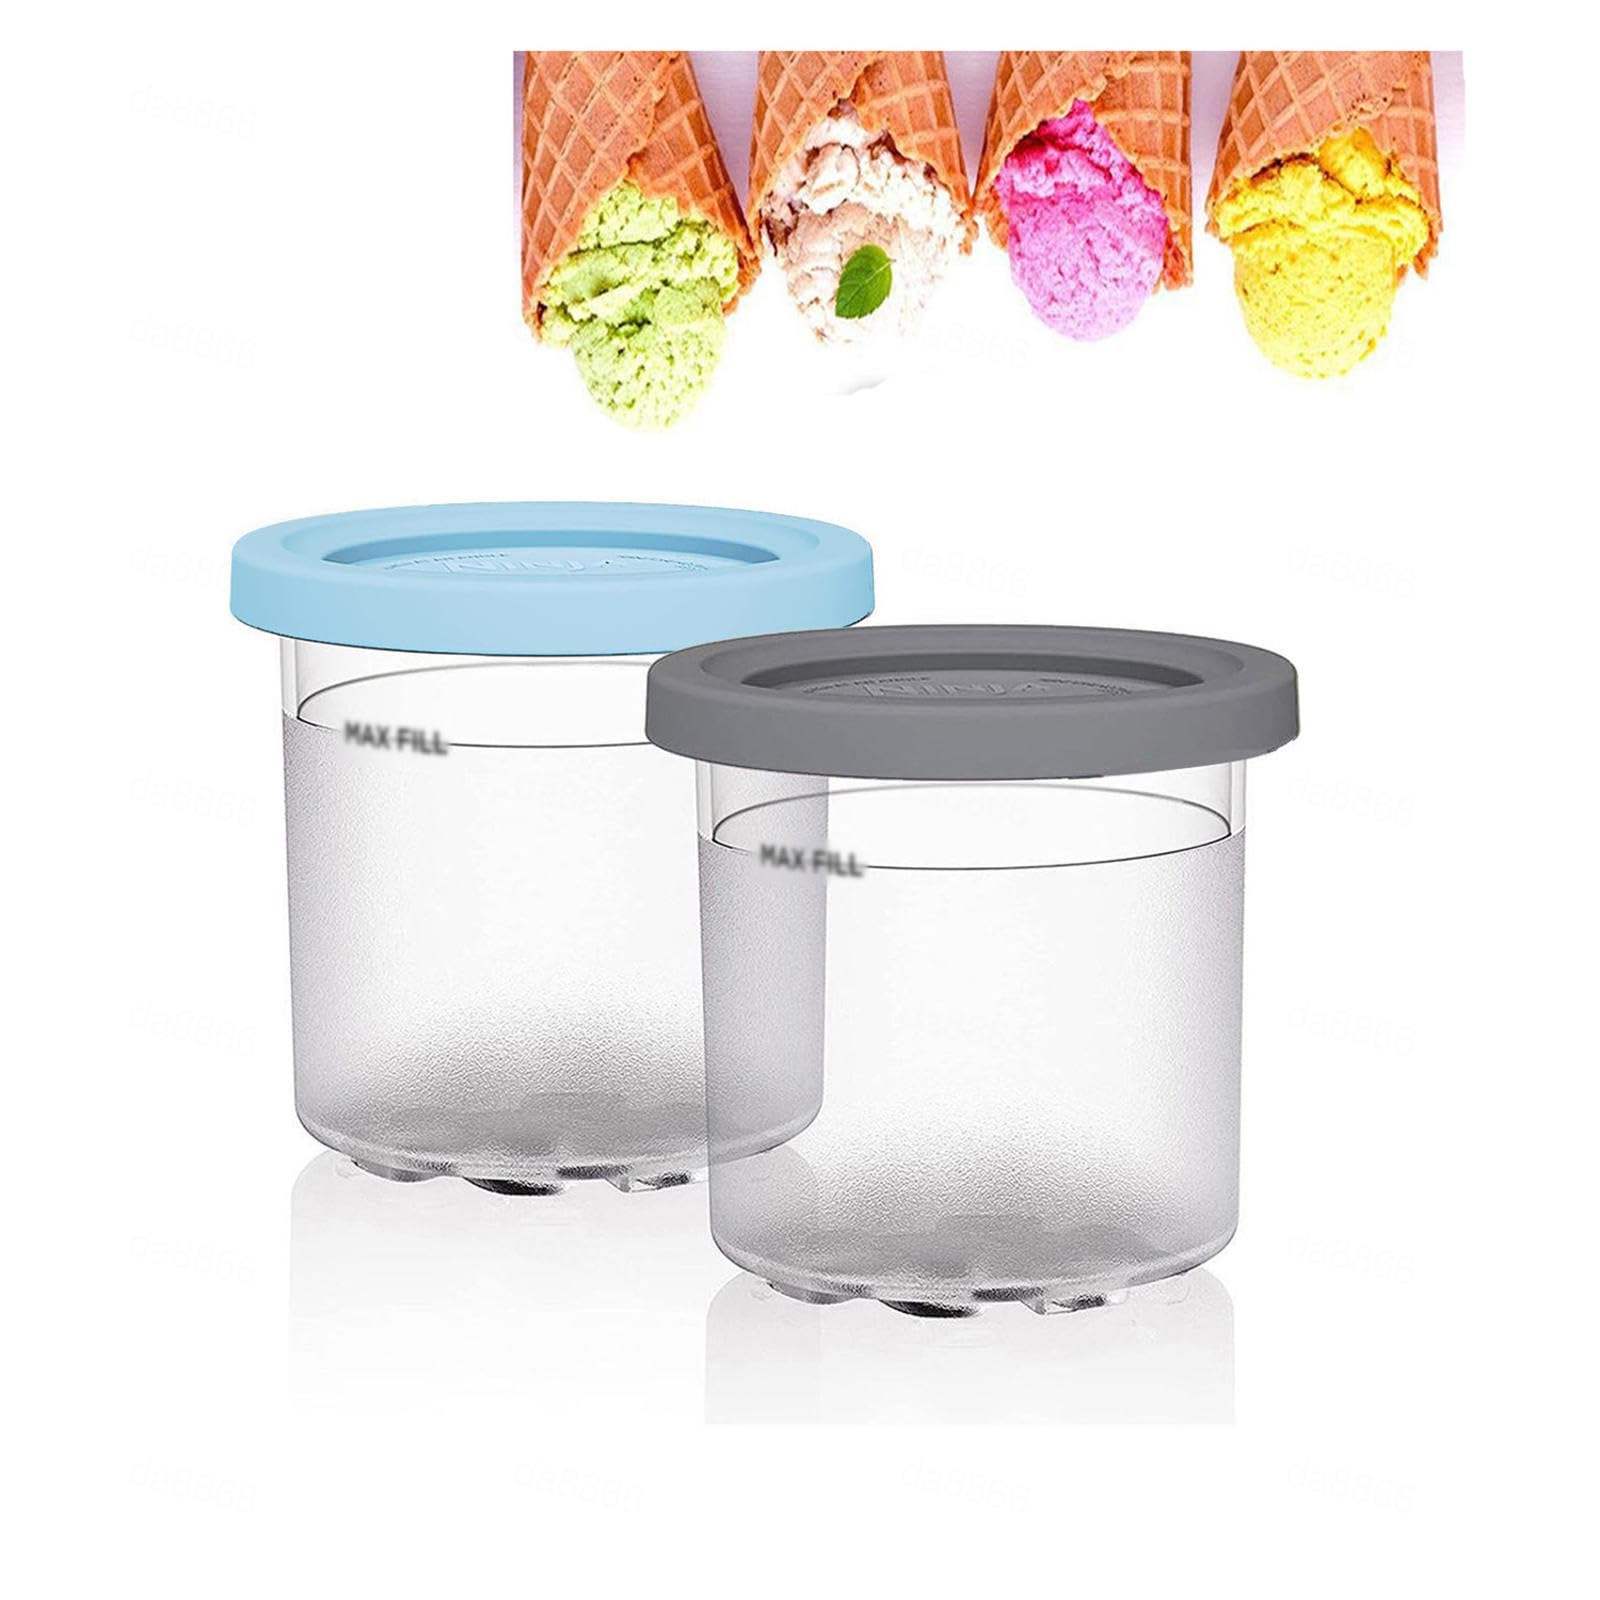 EVANEM 2/4/6PCS Creami Containers, for Ninja Creami Deluxe,16 OZ Icecream Container Airtight and Leaf-Proof for NC301 NC300 NC299AM Series Ice Cream Maker,Gray+Blue-2PCS